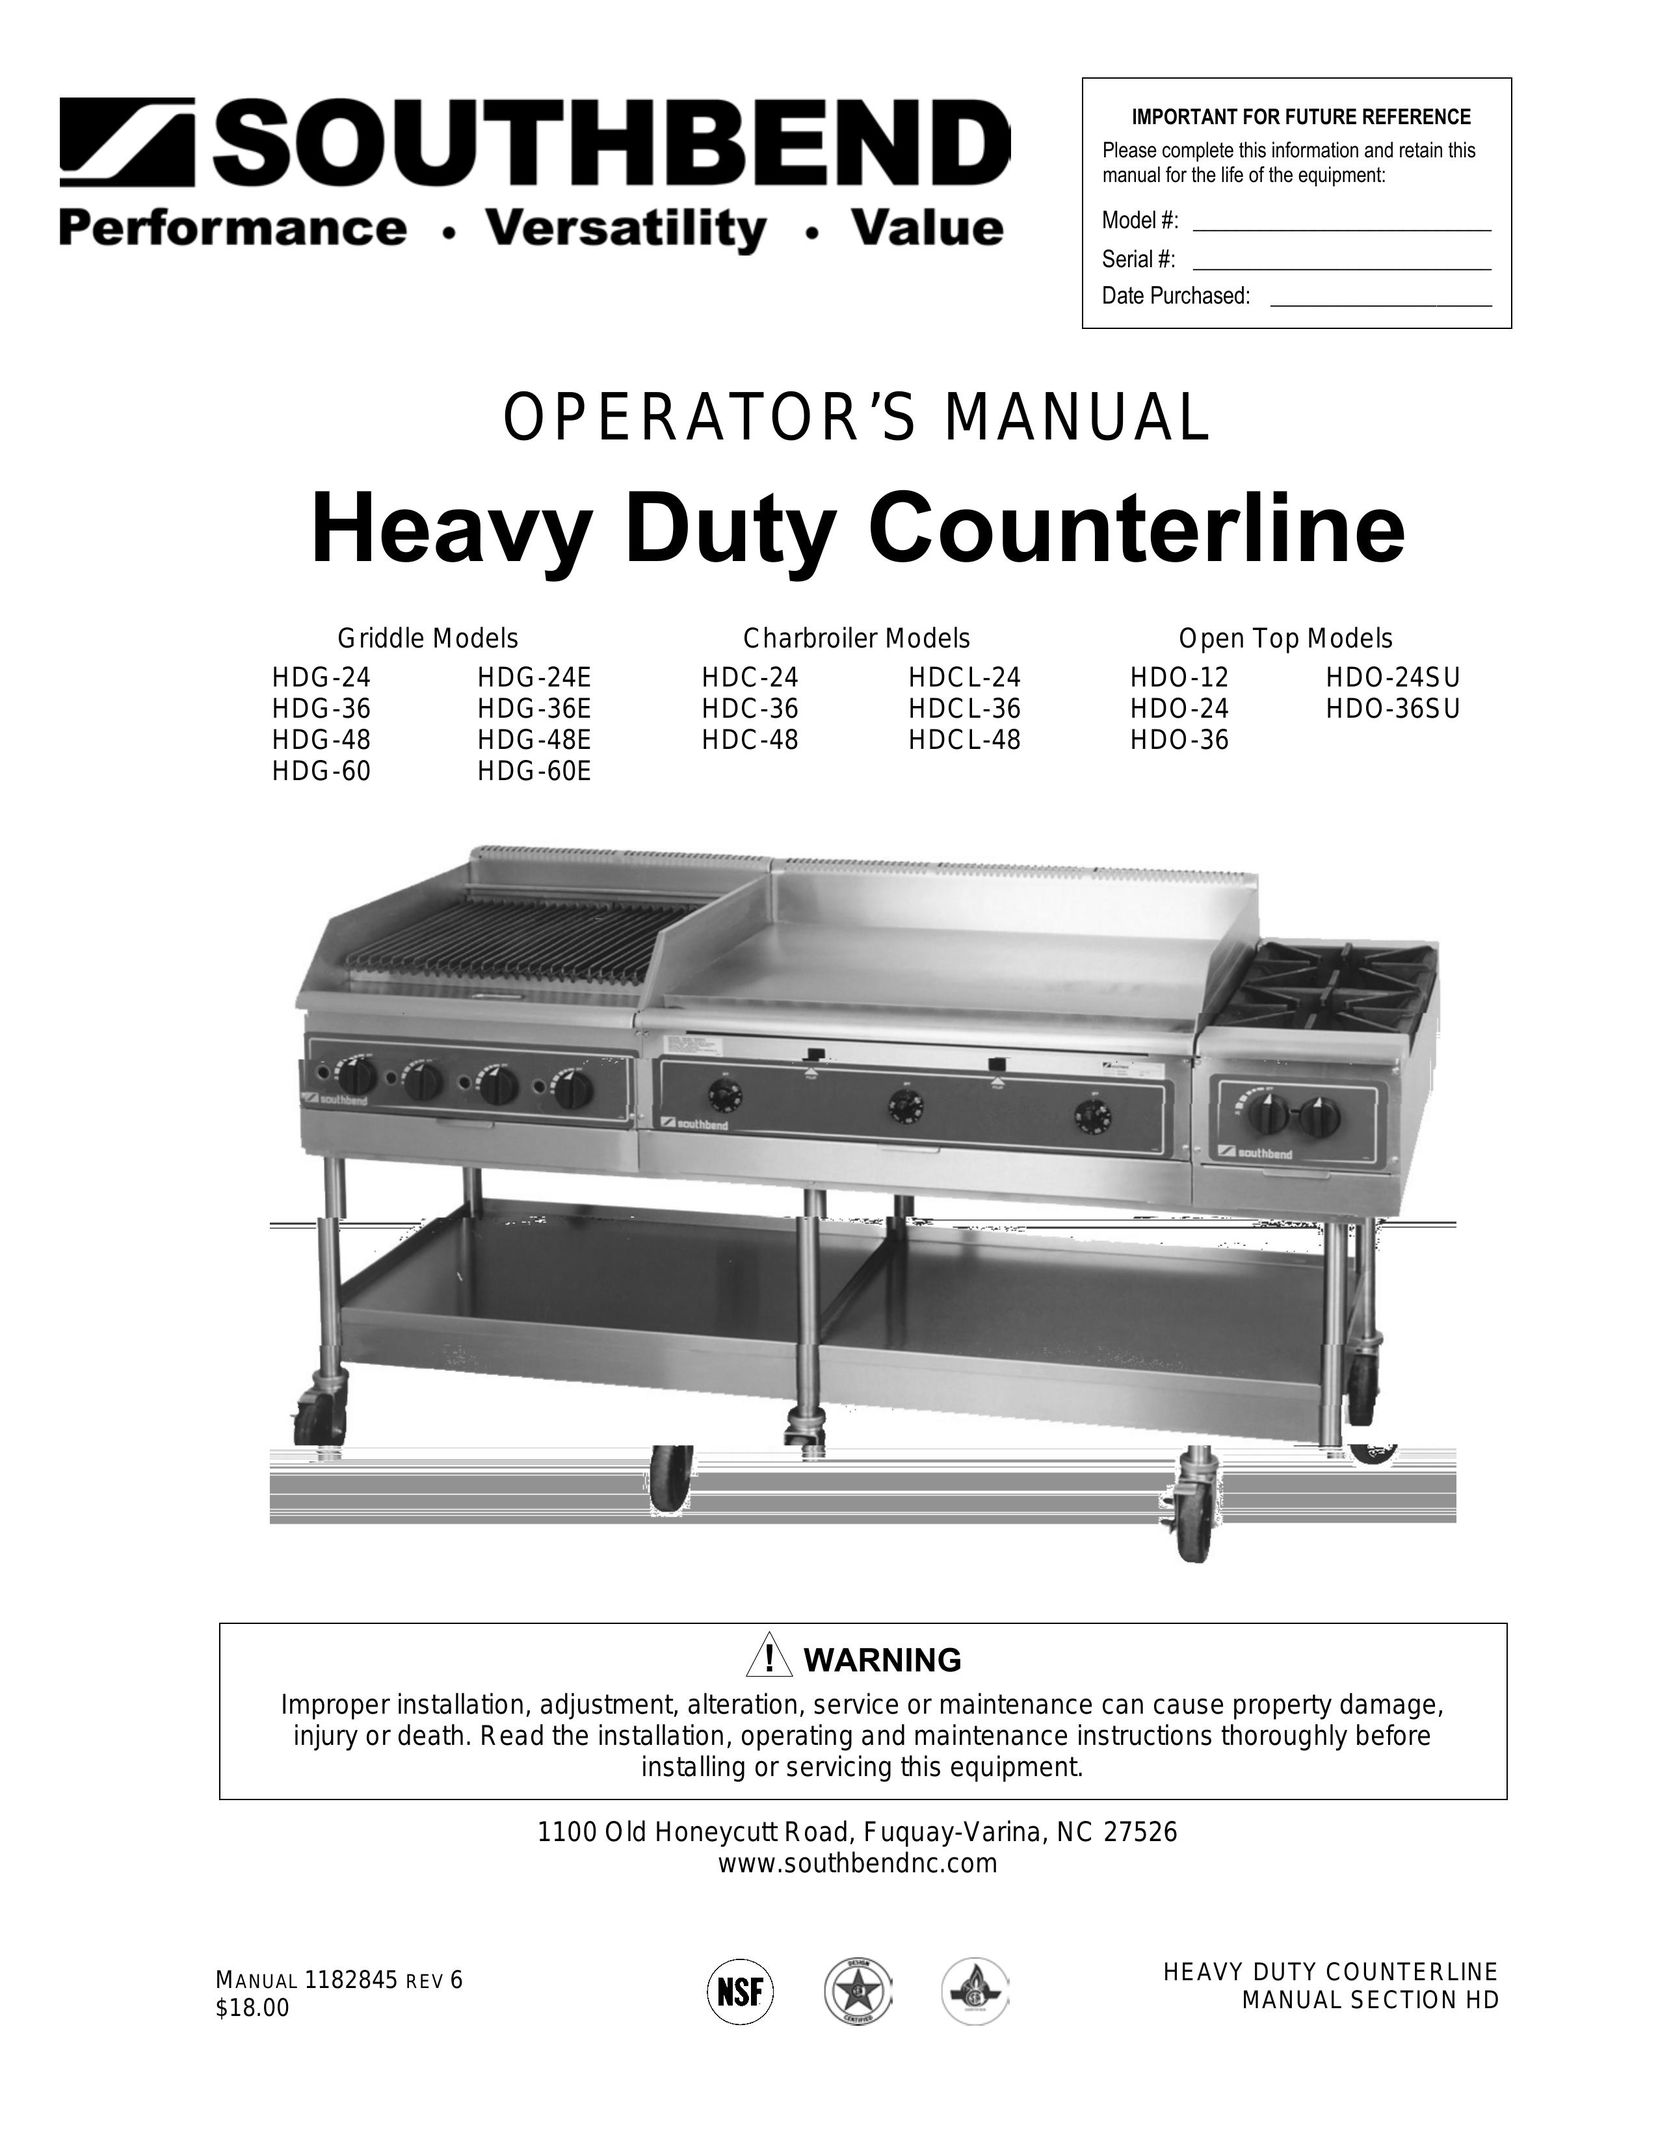 Southbend HDG-36E Cooktop User Manual